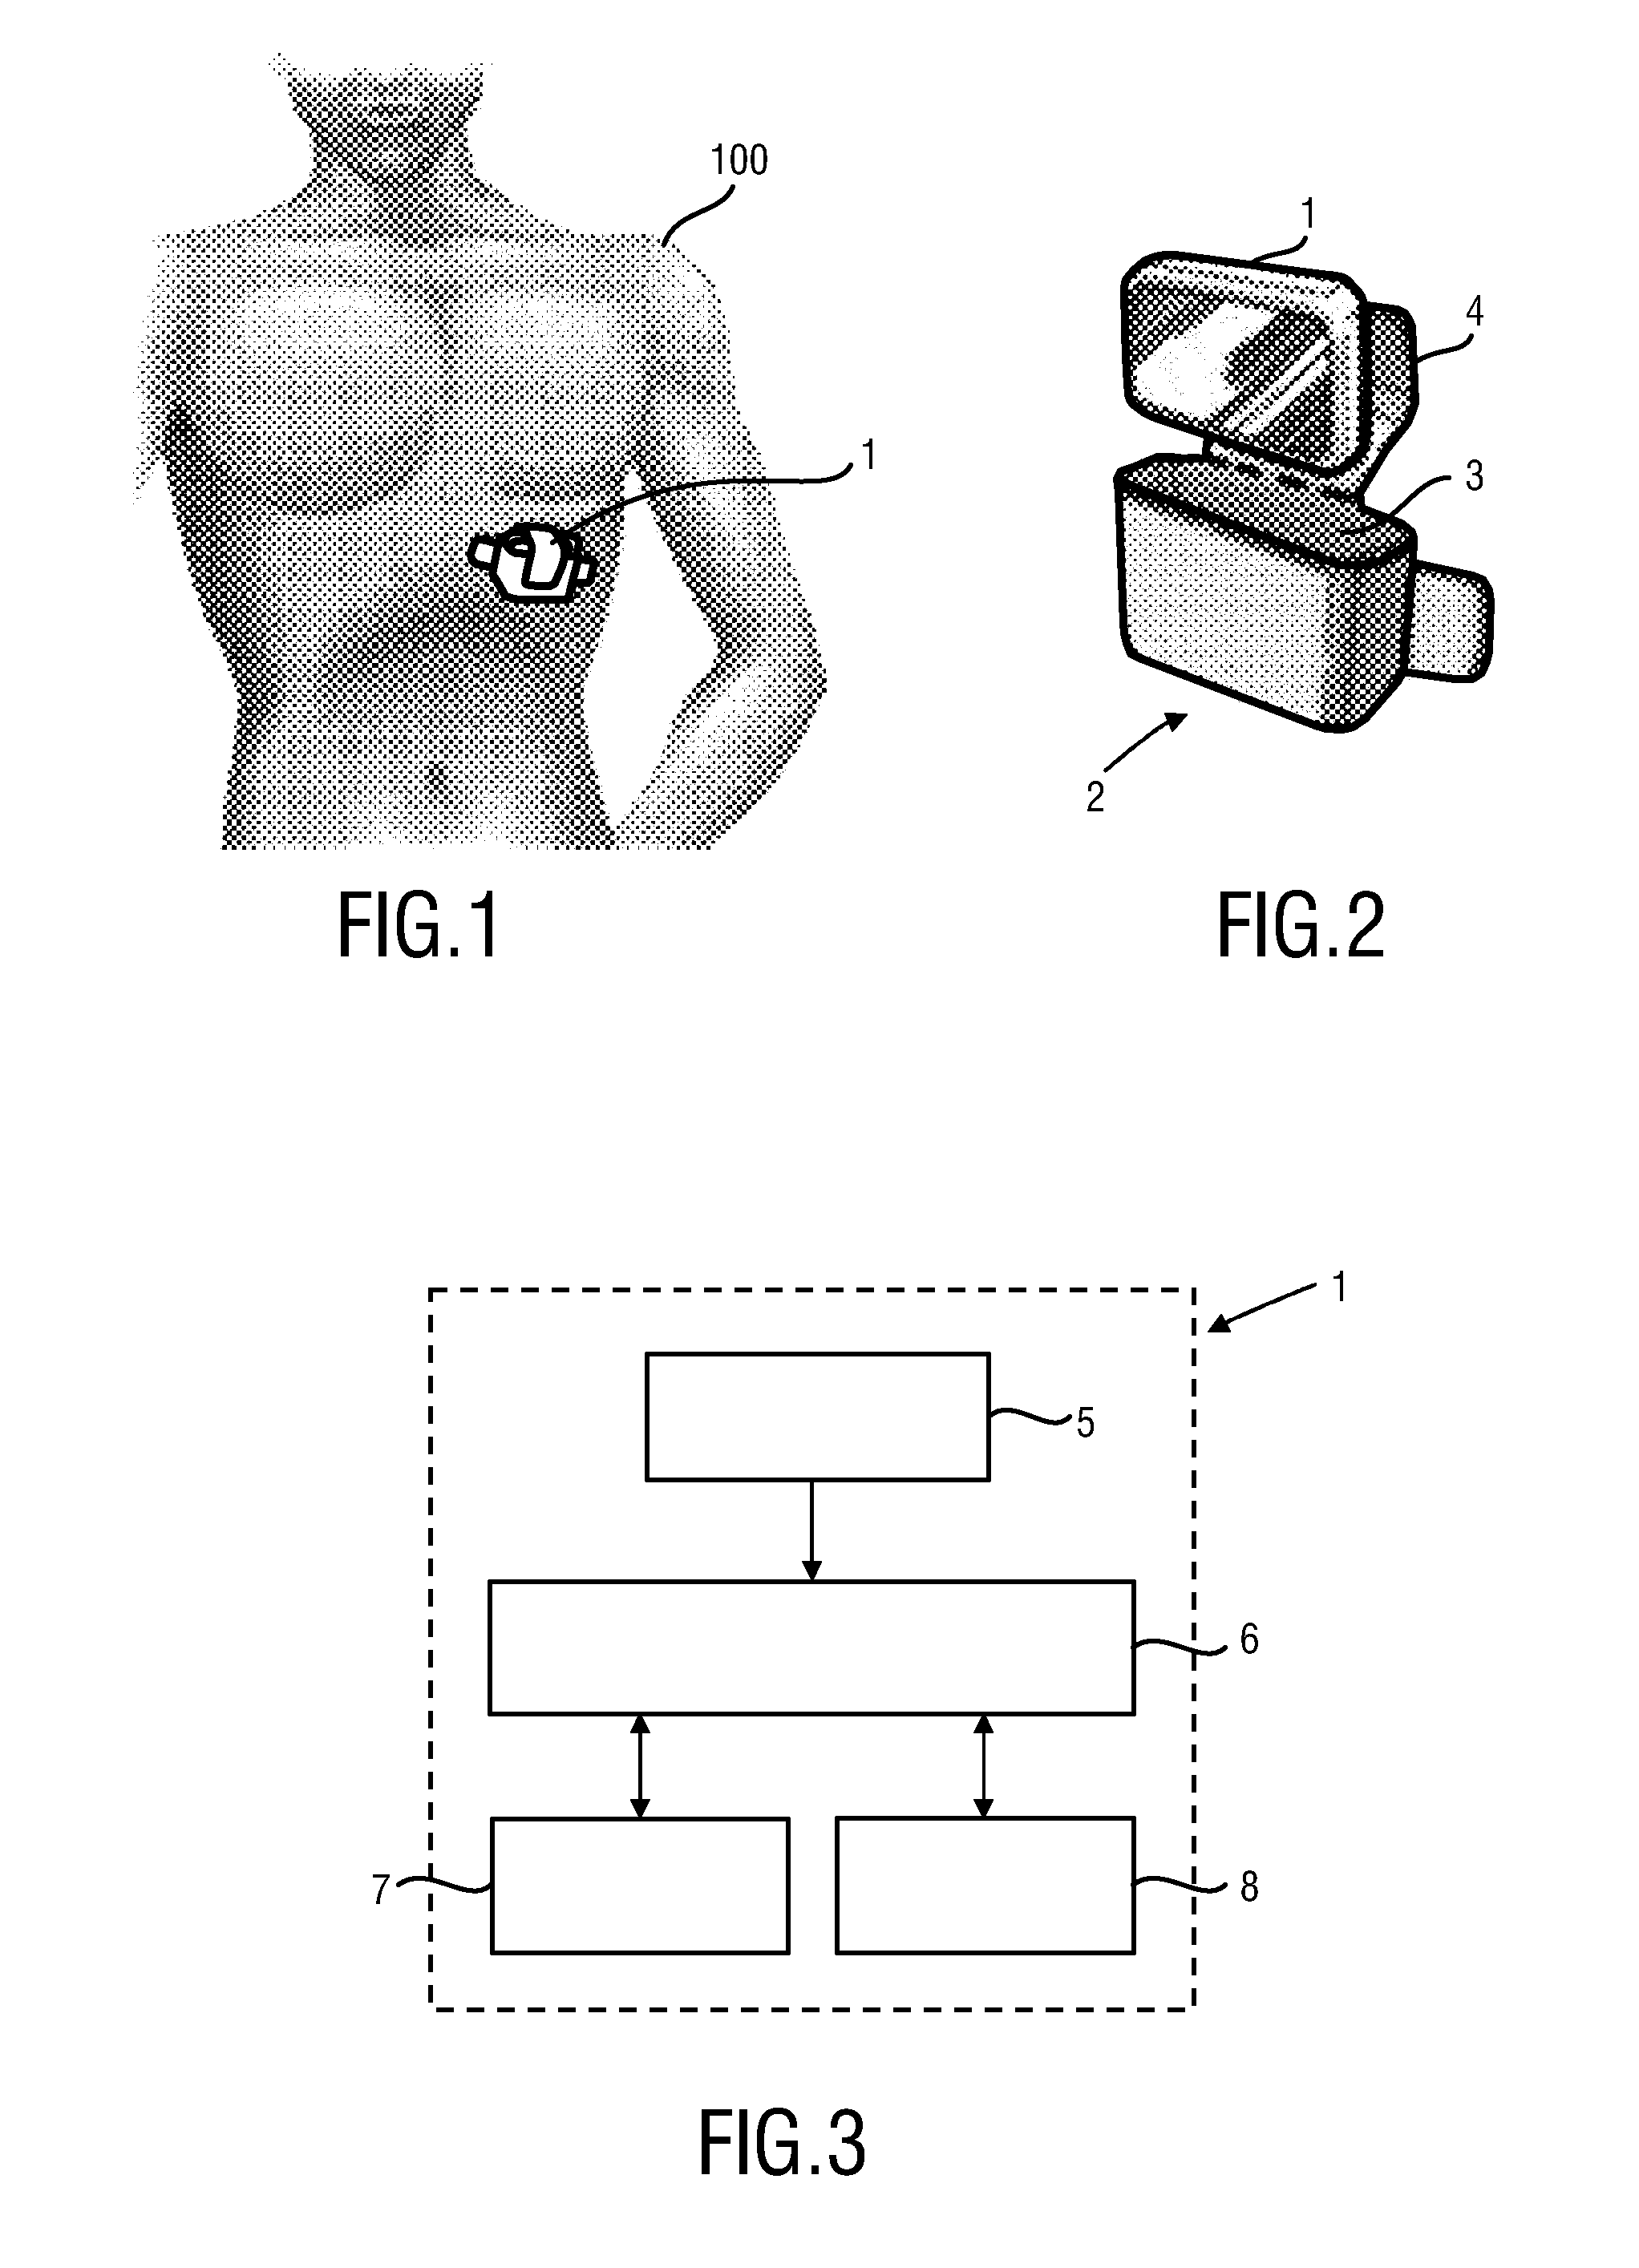 Processing apparatus and processing method for determining a respiratory signal of a subject